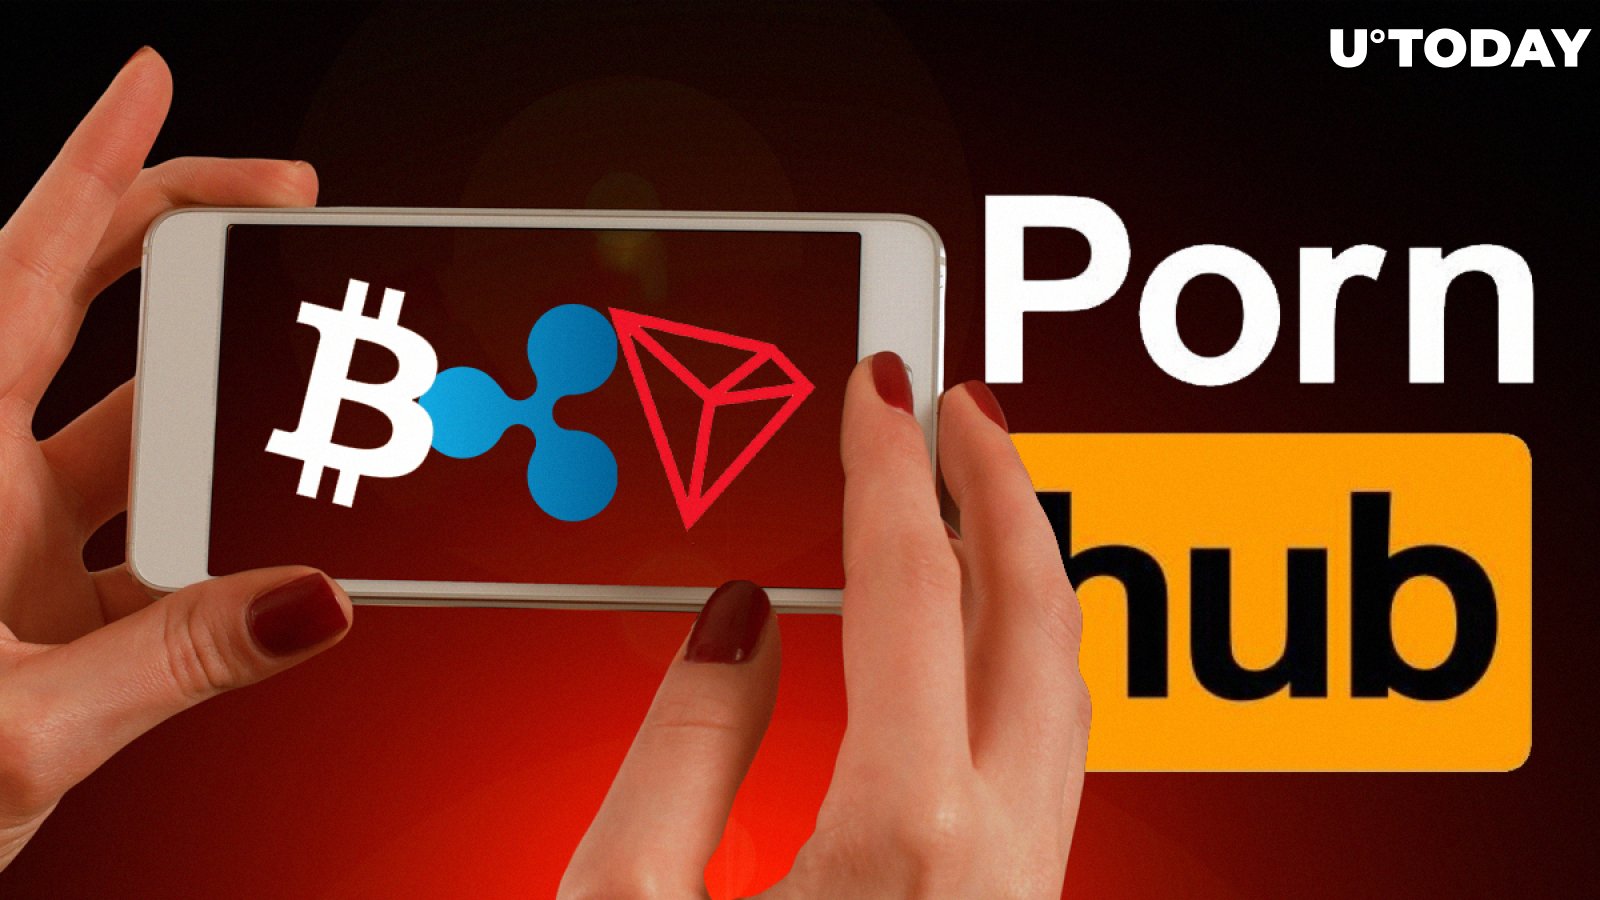 Pornhub Models Lose PayPal Payouts. Bitcoin, XRP, Tron Come to the Rescue